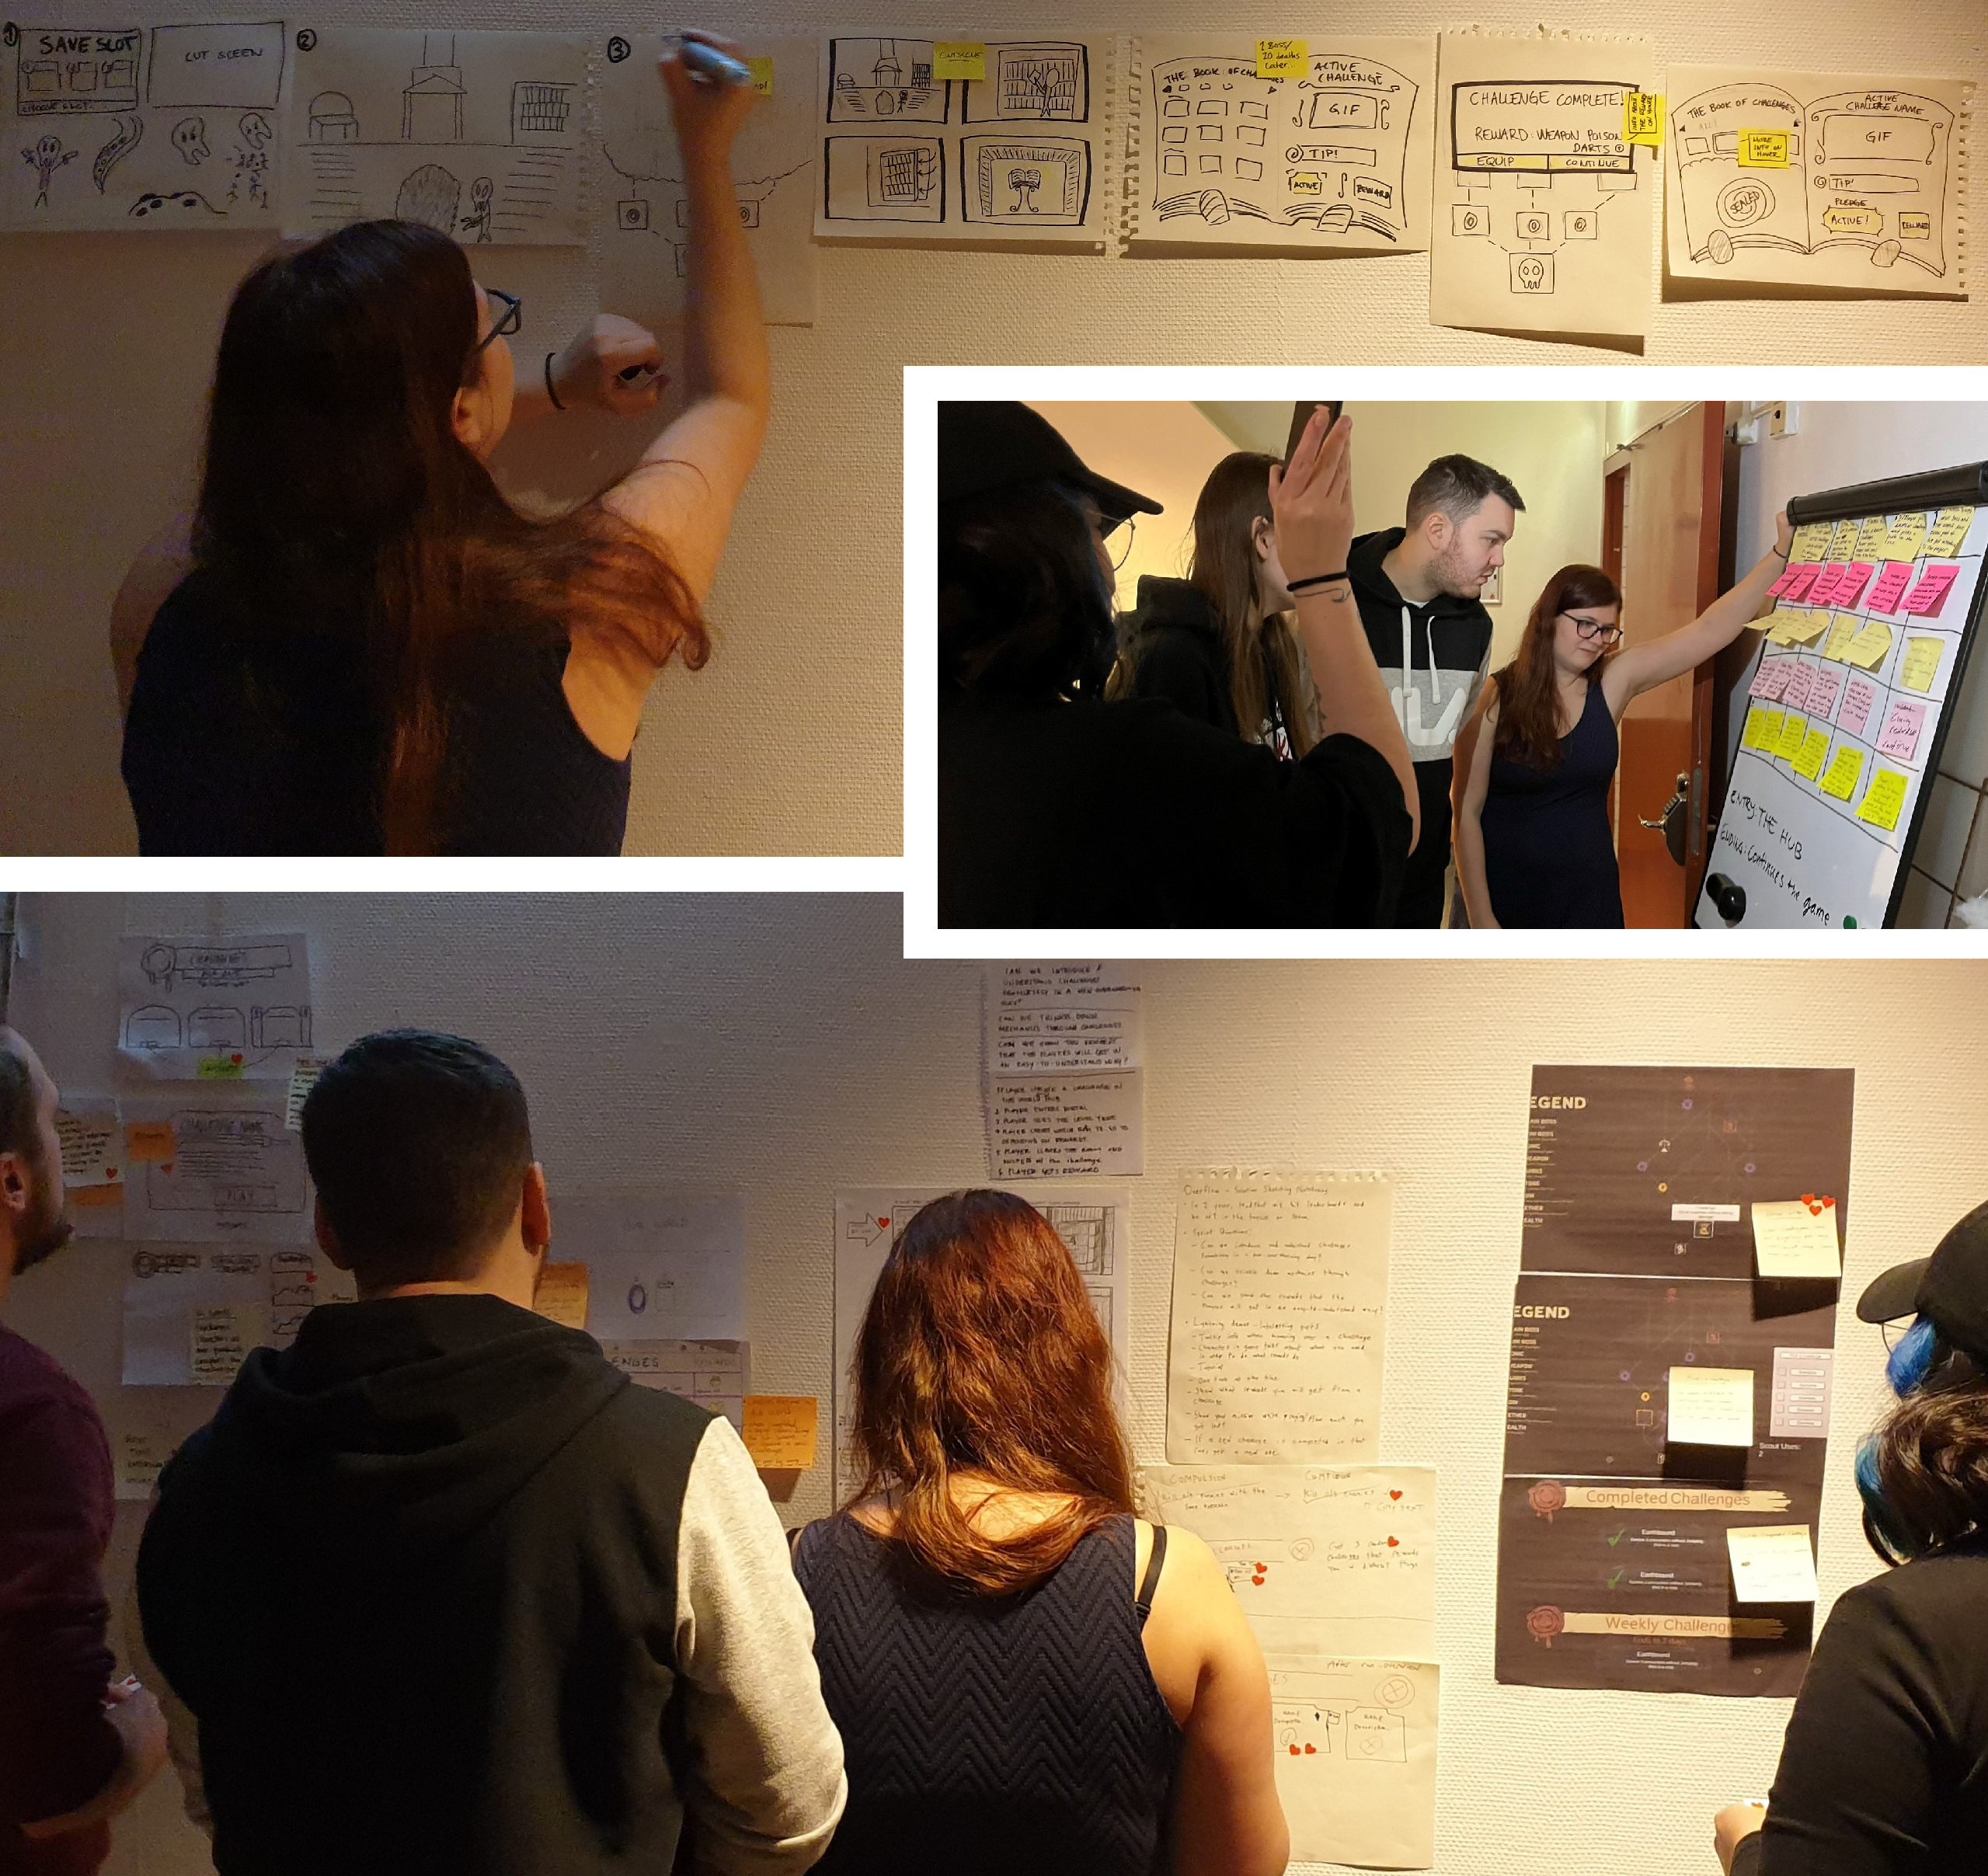 Picture of our team during the workshop, looking at papers on the wall with sketches